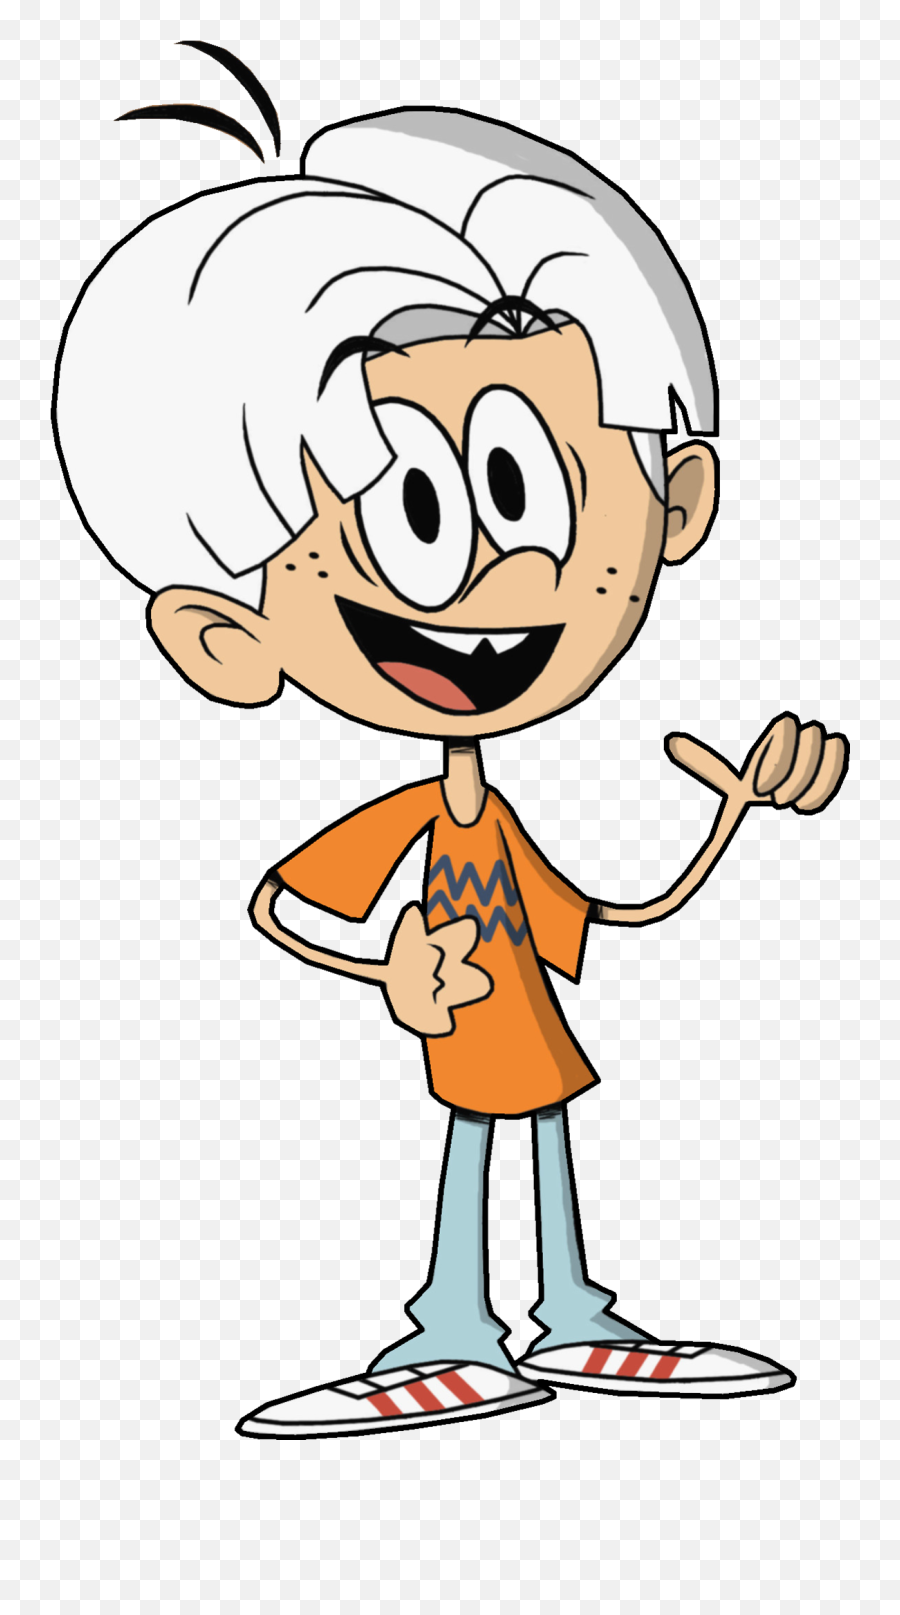 90s Png - Lincoln Loud 90s Au Vector Cartoon 1326455 Cartoon,90s Png